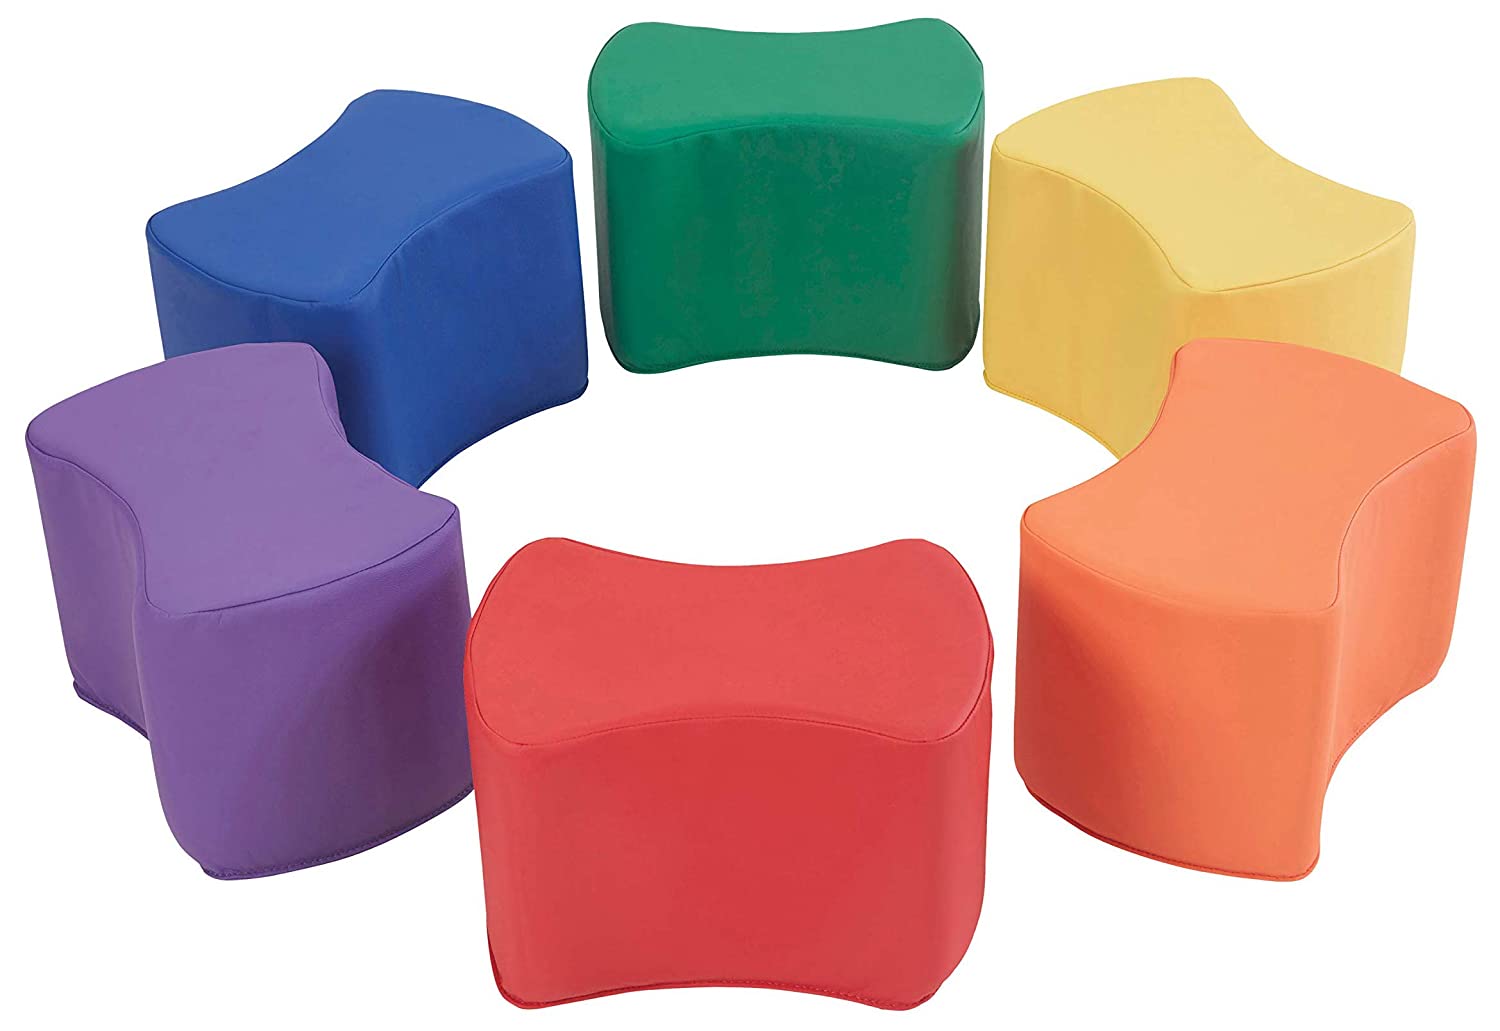 FDP SoftScape 10 inch Butterfly Stool Modular Seating Set for Toddlers and Kids, Soft Lightweight Foam, Colorful Flexible Seating for In-Home Learning, Classrooms and Daycares (6-Piece Set) - Assorted